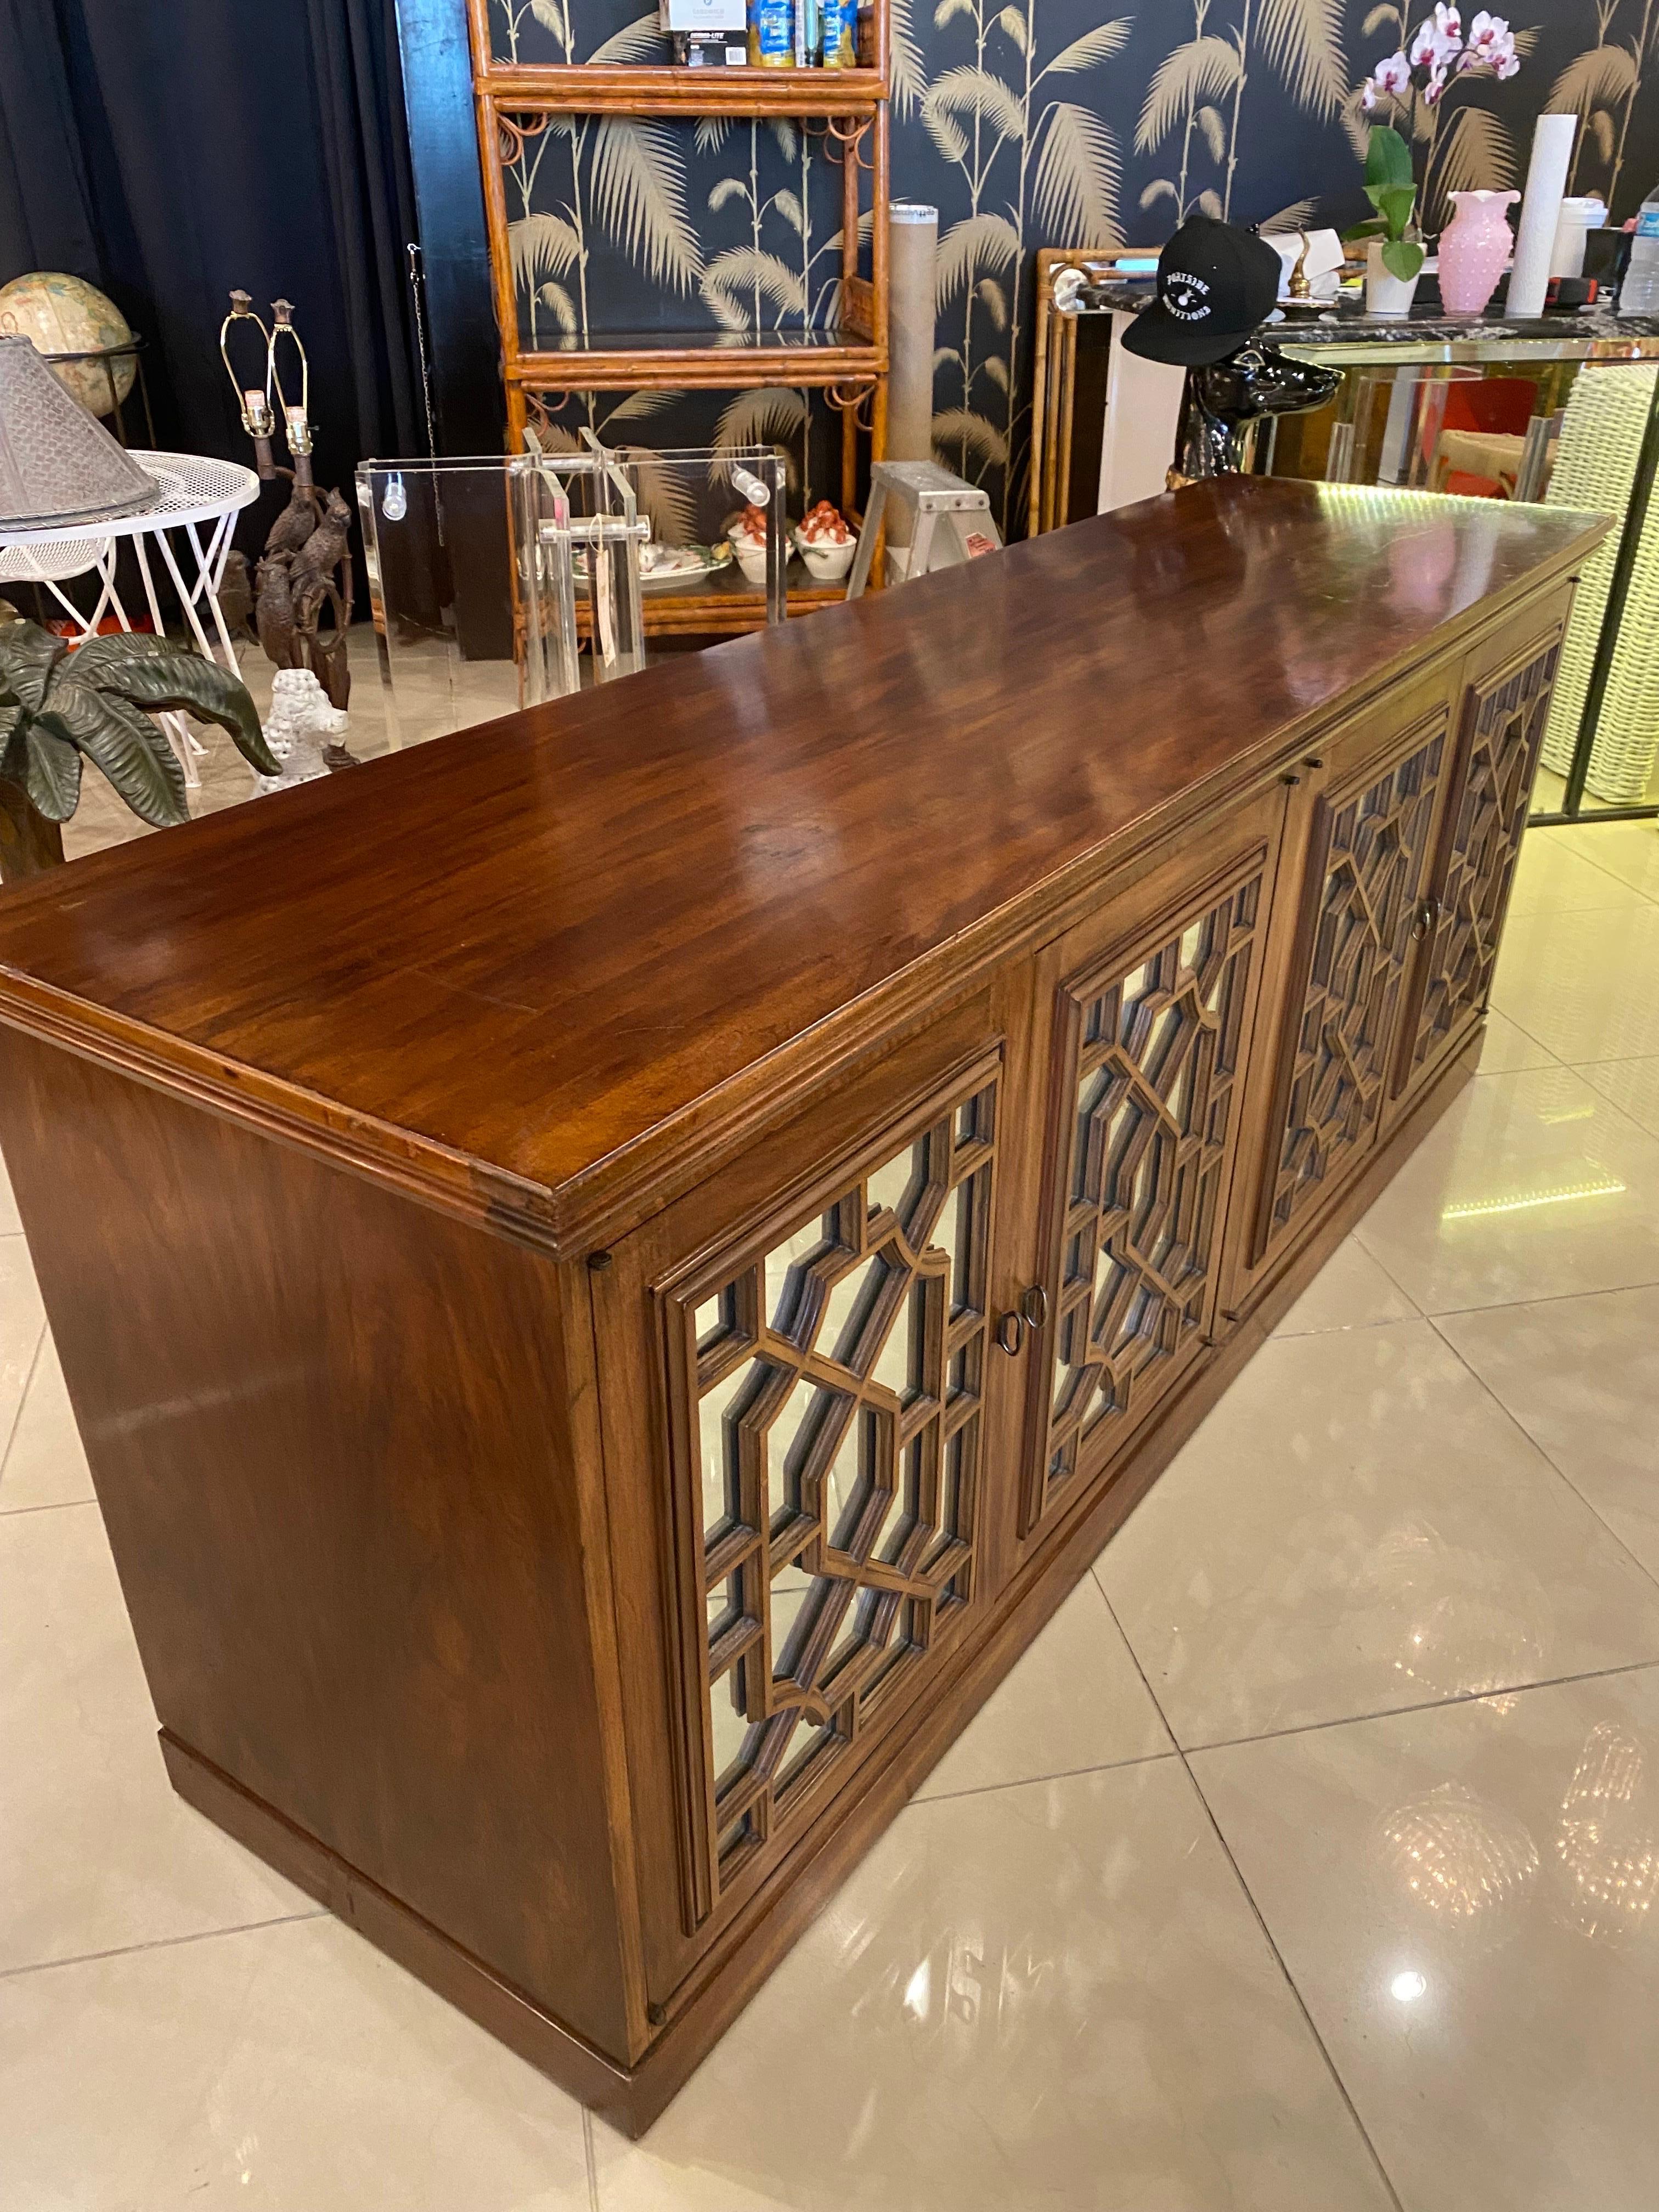 Vintage Wood Chinoiserie Fretwork Fret Mirrored Credenza Buffet Sideboard Doors For Sale 1